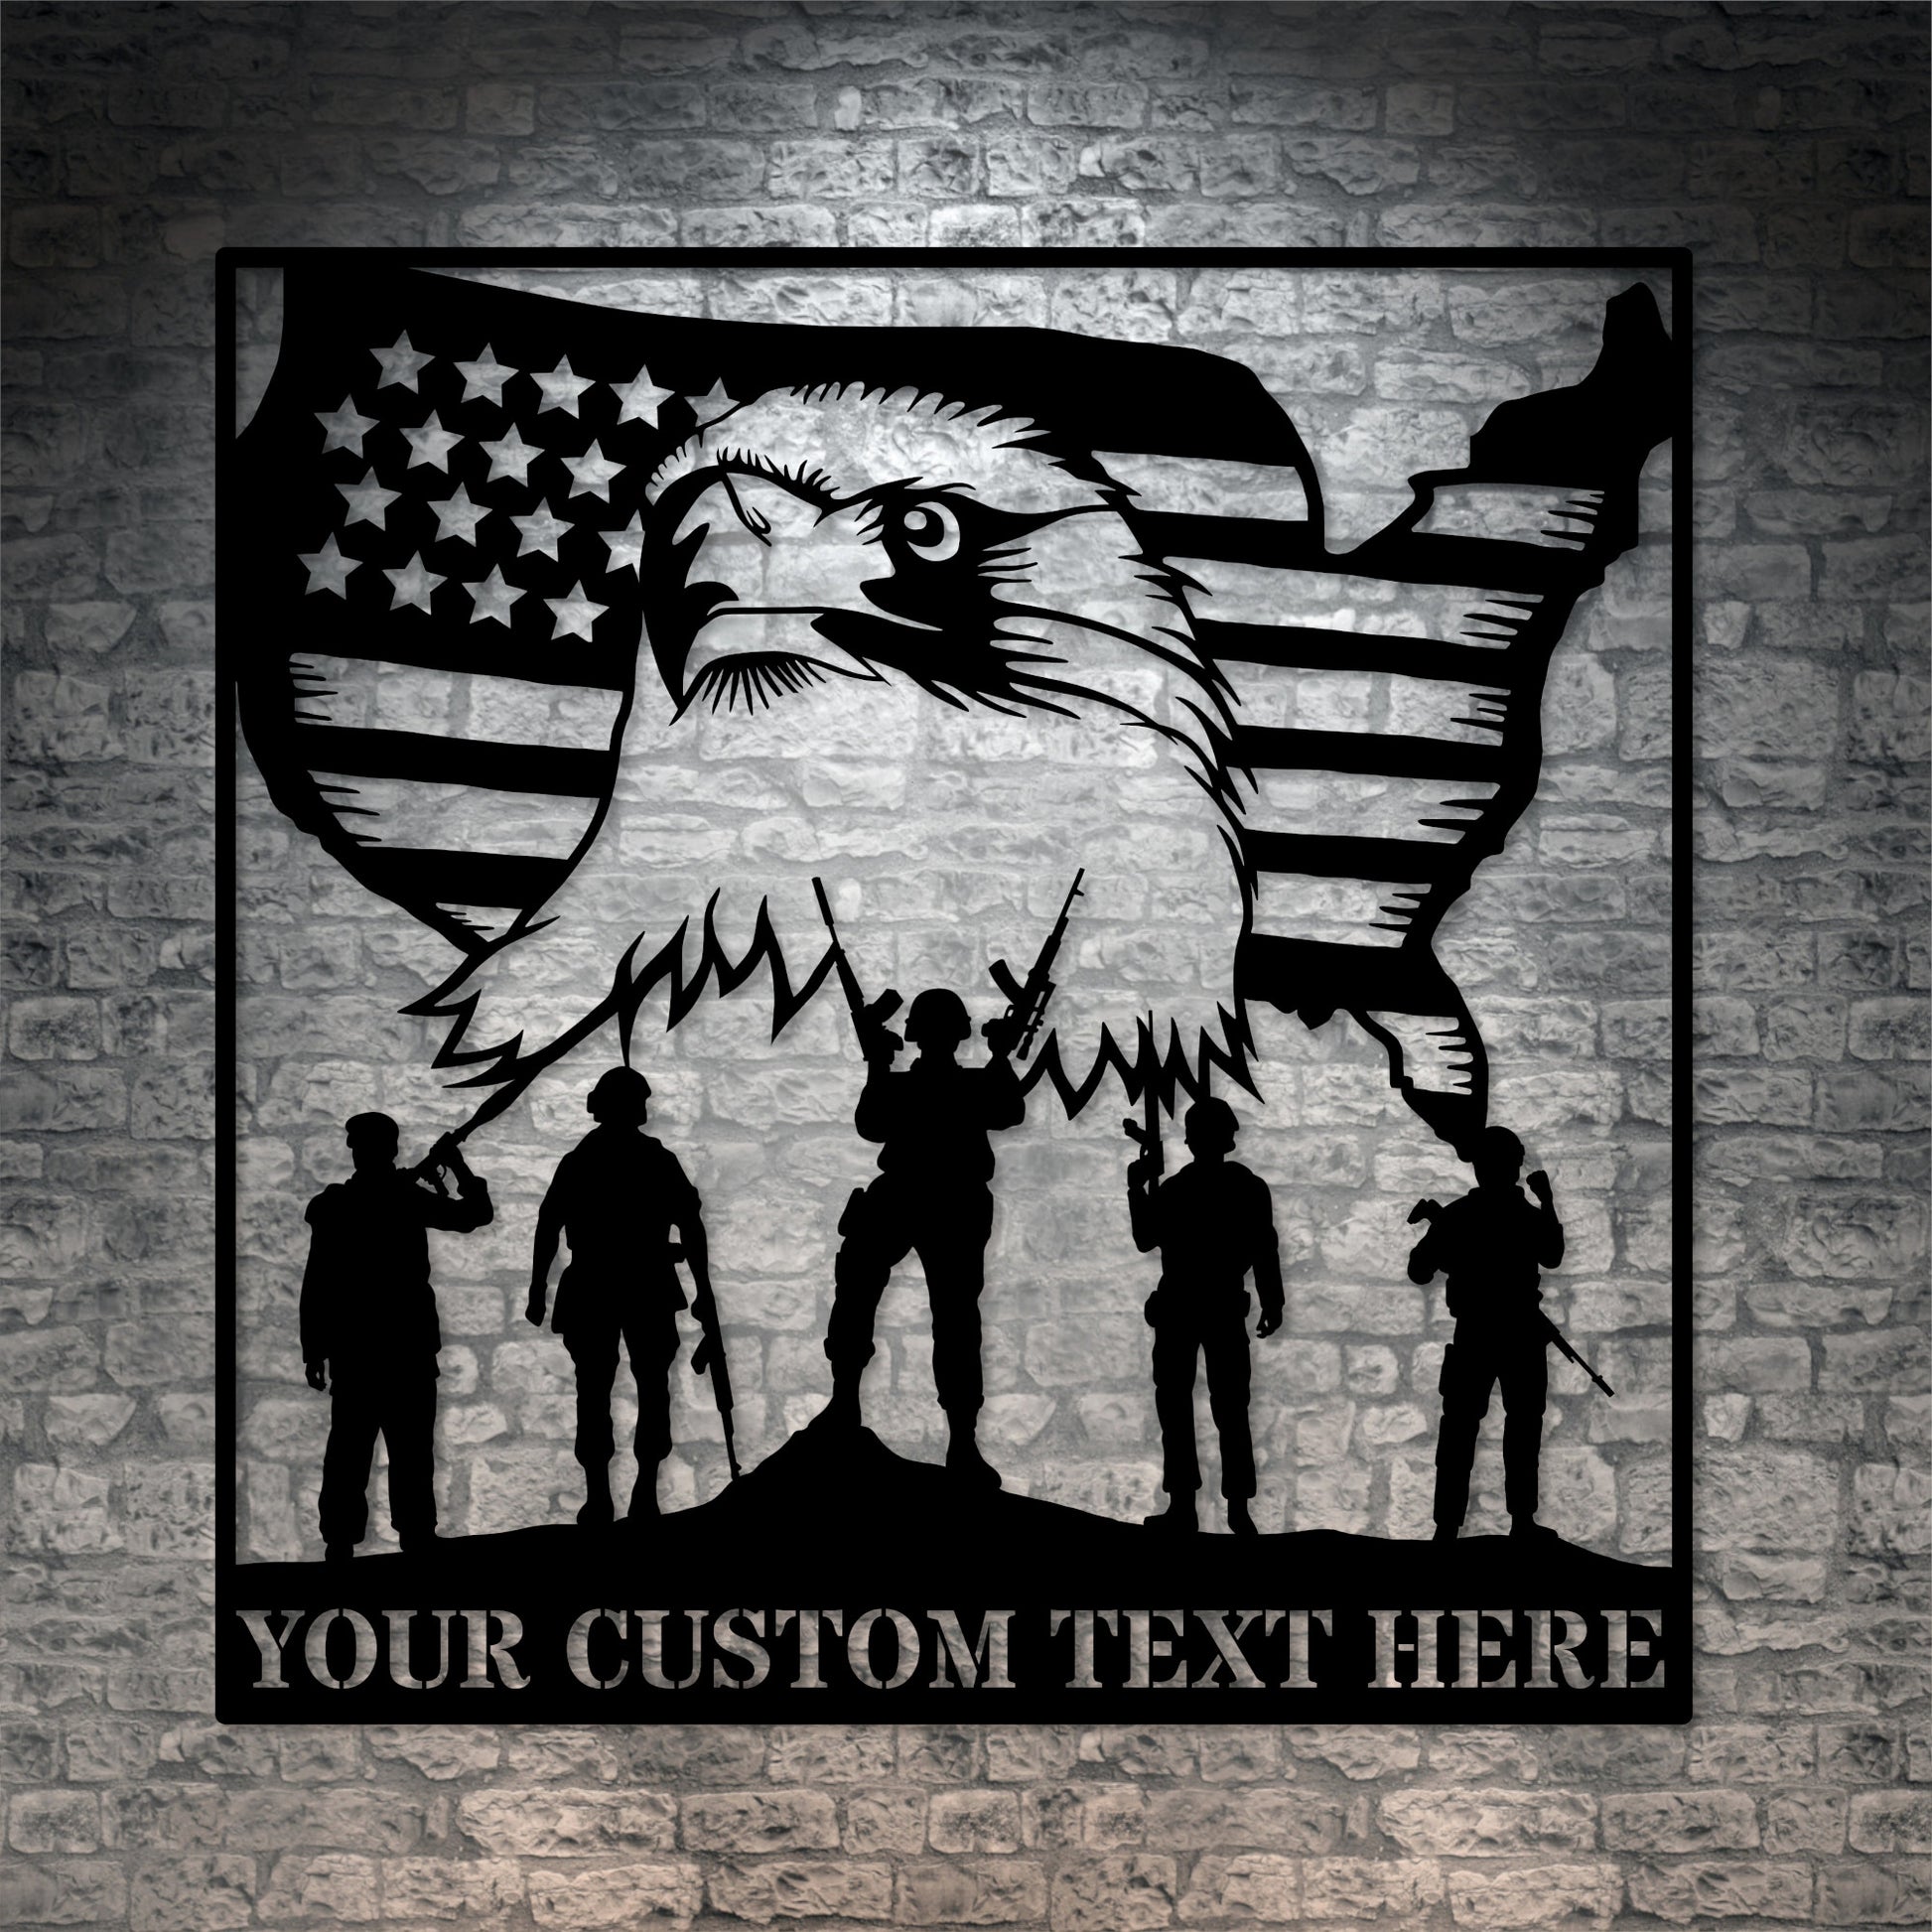 Personalized US Flag Military Eagle Name Metal Sign. Patriotic Wall Art Decor. Customized US Soldier Wall Hanging. American Veteran Freedom